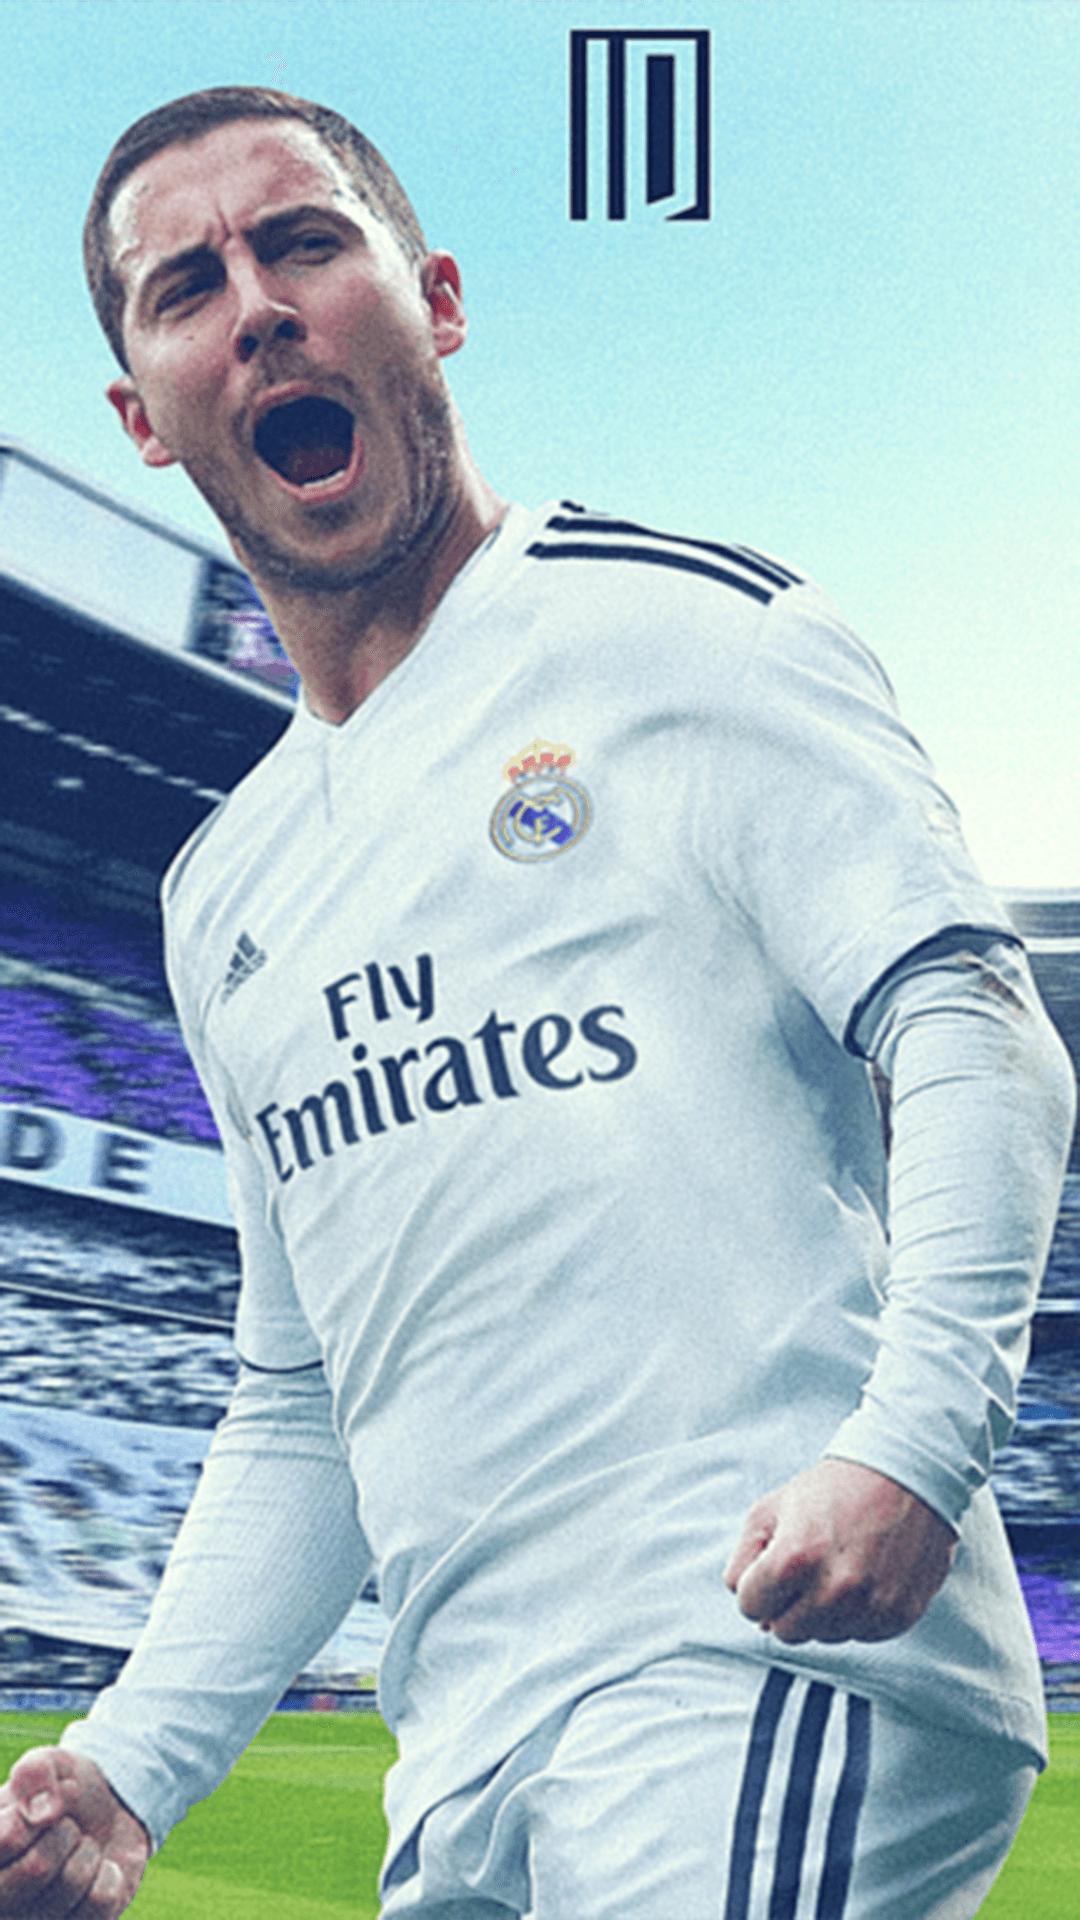 download wallpaper real madrid android,jersey,football player,player,cool,t shirt